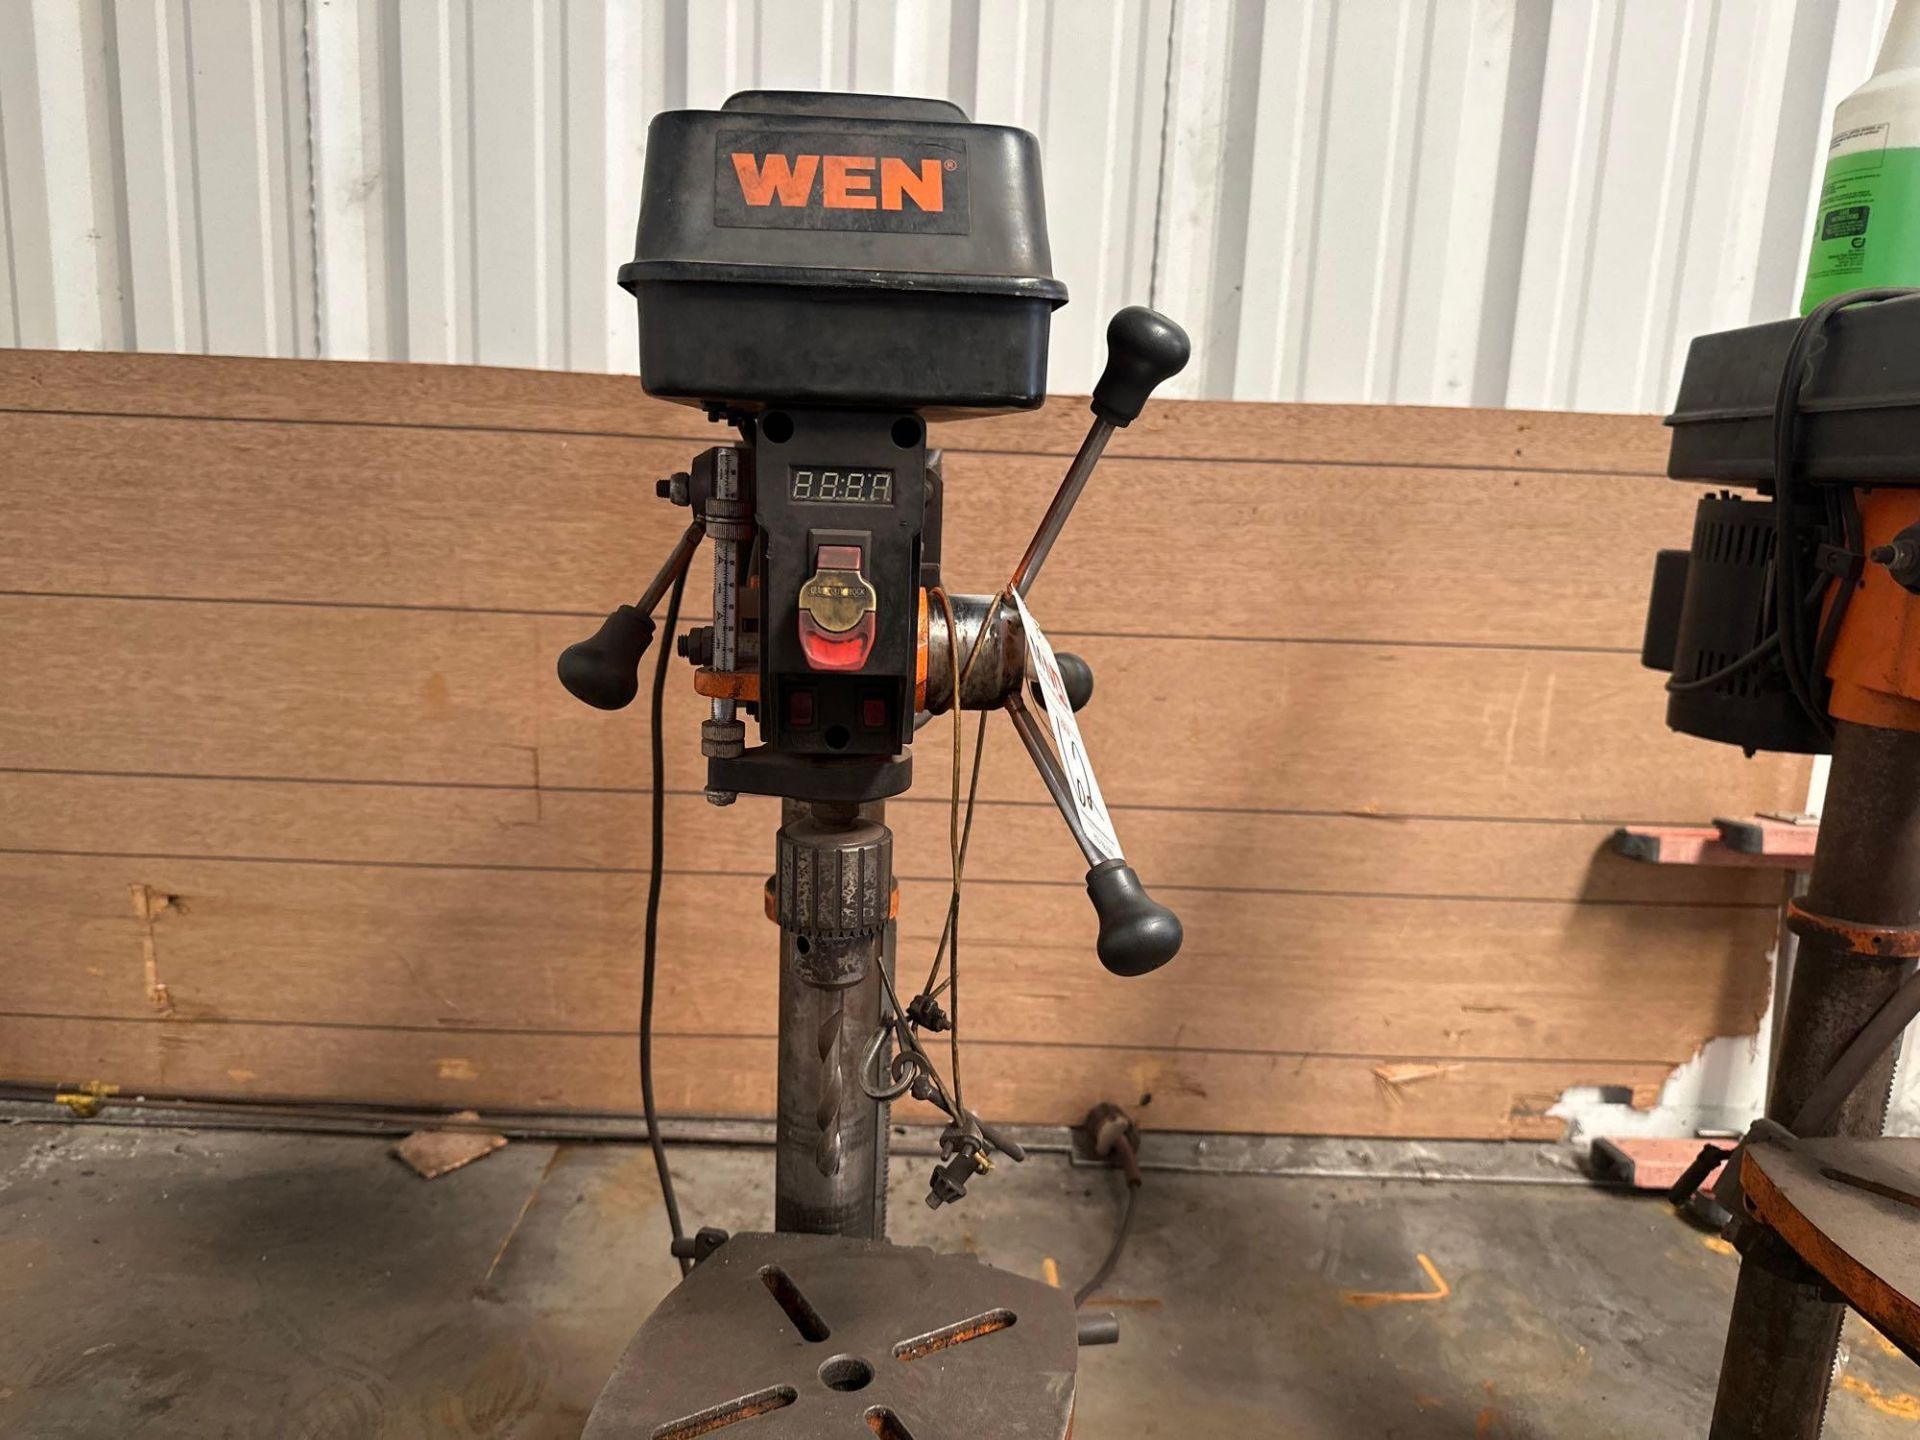 WEN 12” Variable Speed Bench Drill Press, s/n GLT1708AW11809 *Located in Redlands, CA*